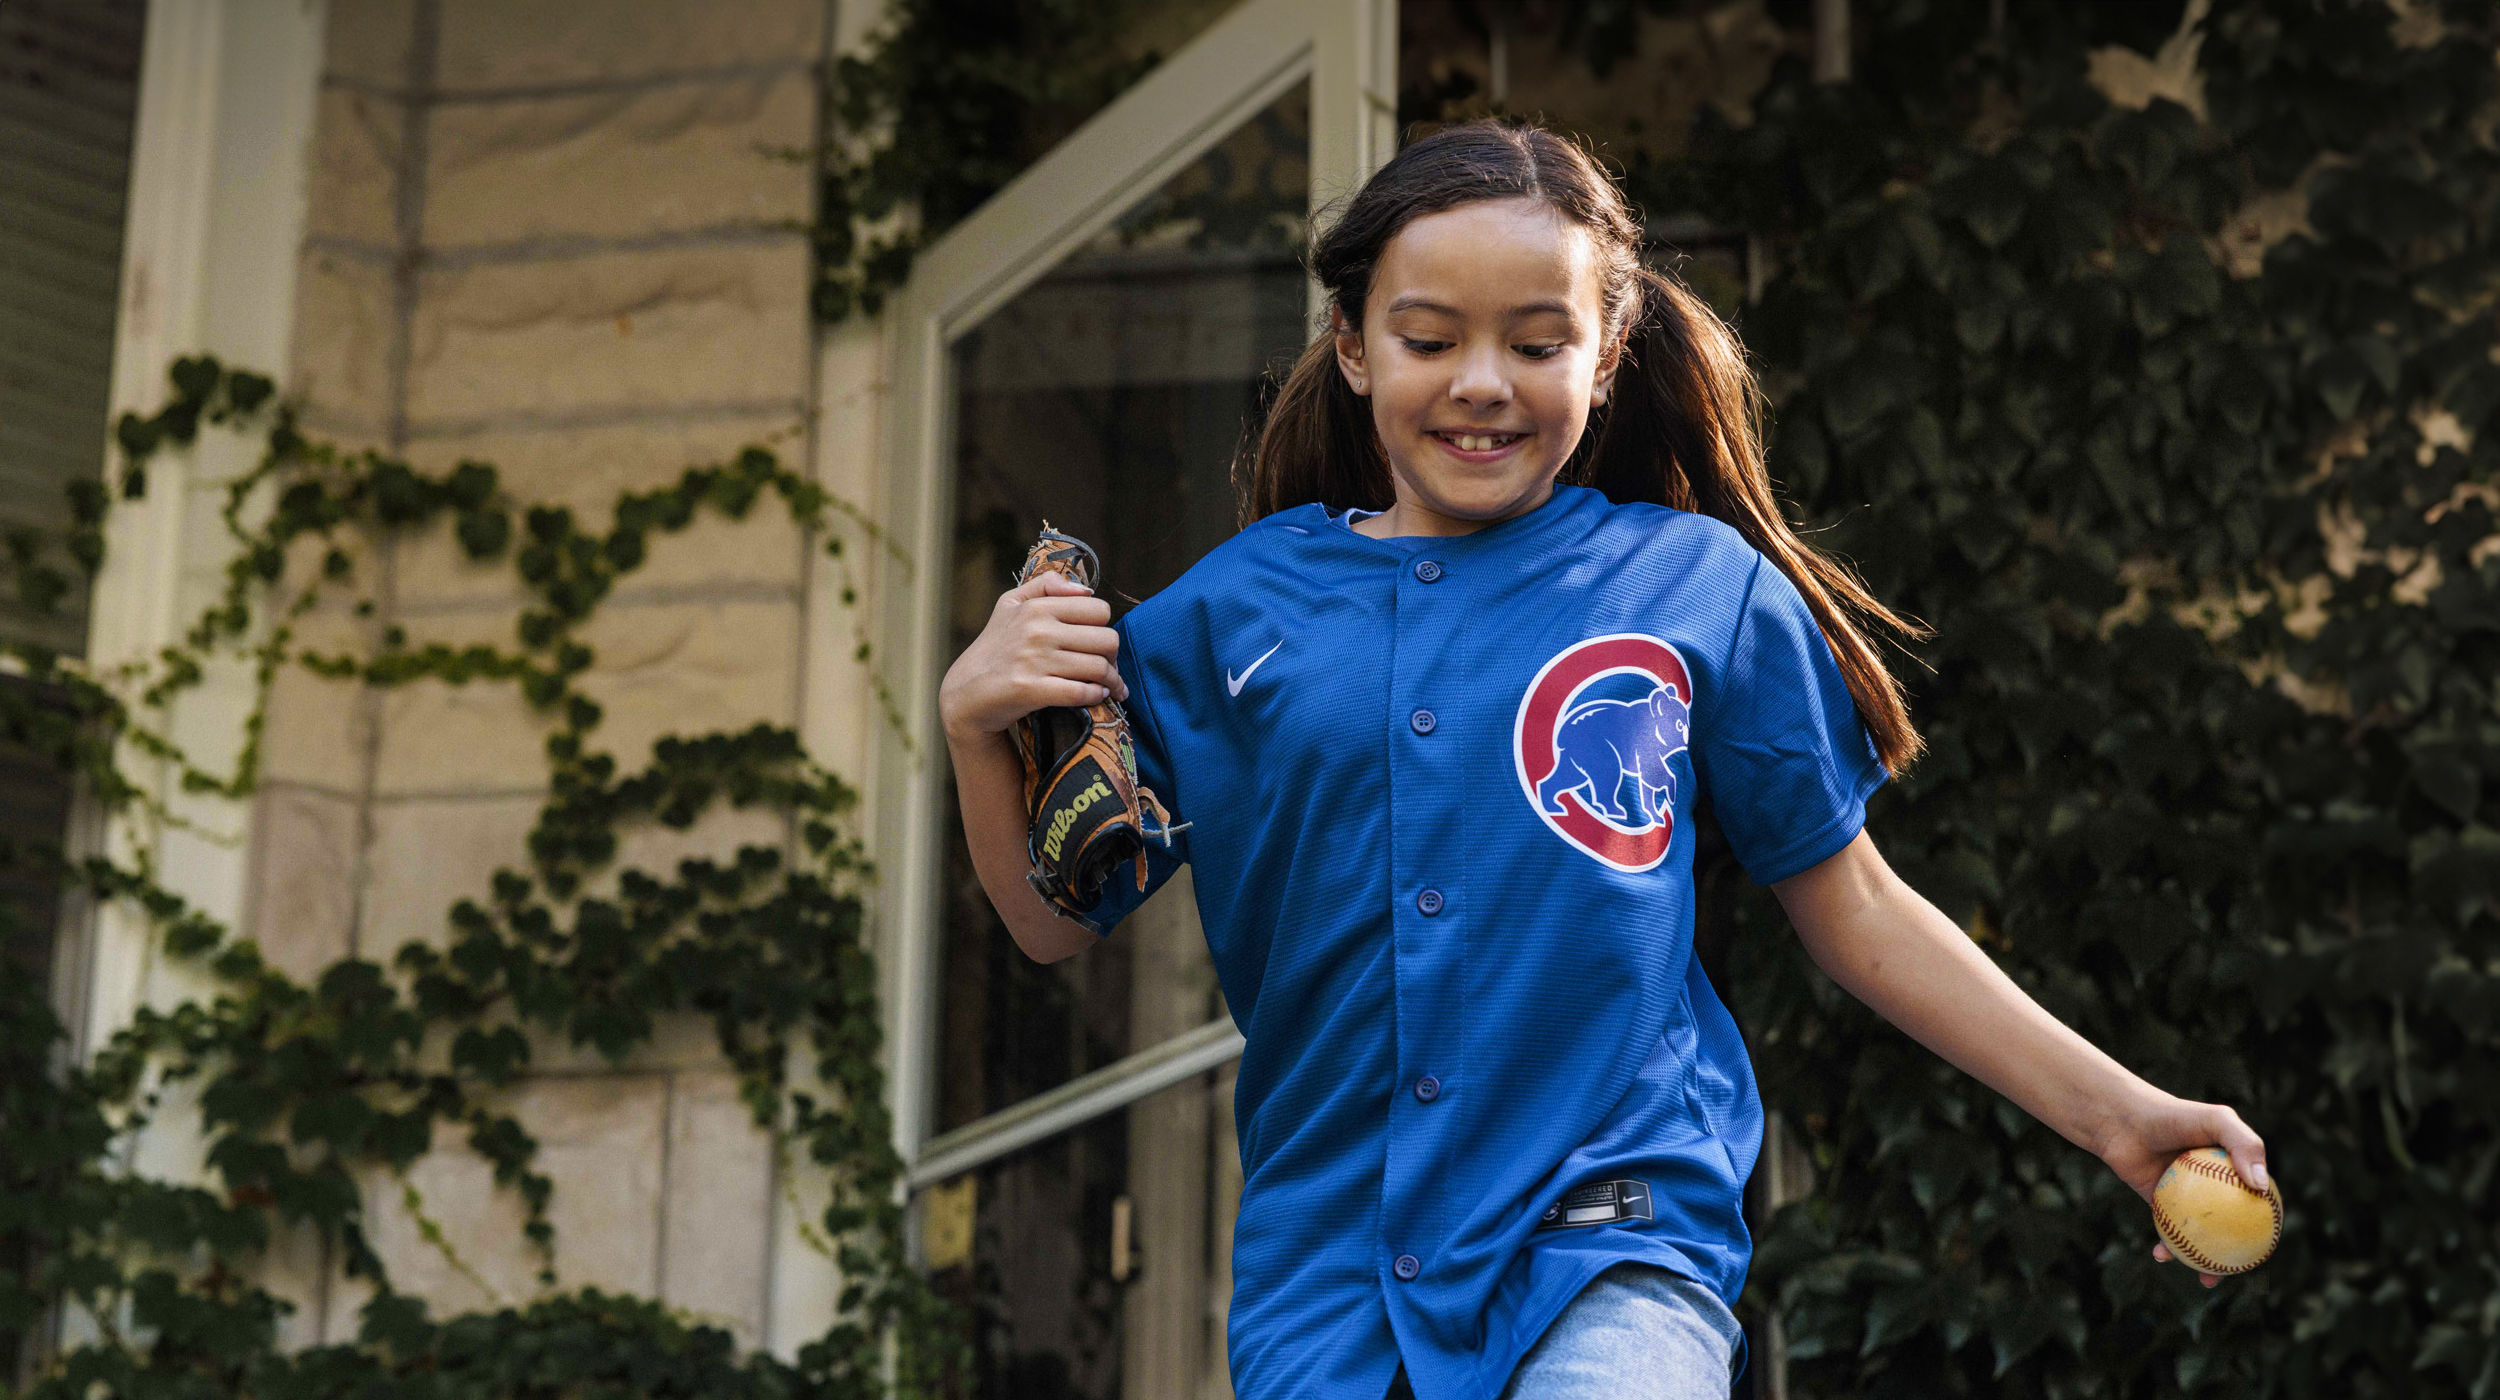 Young girl in Chicago Cubs jersey running and carrying baseball mitt